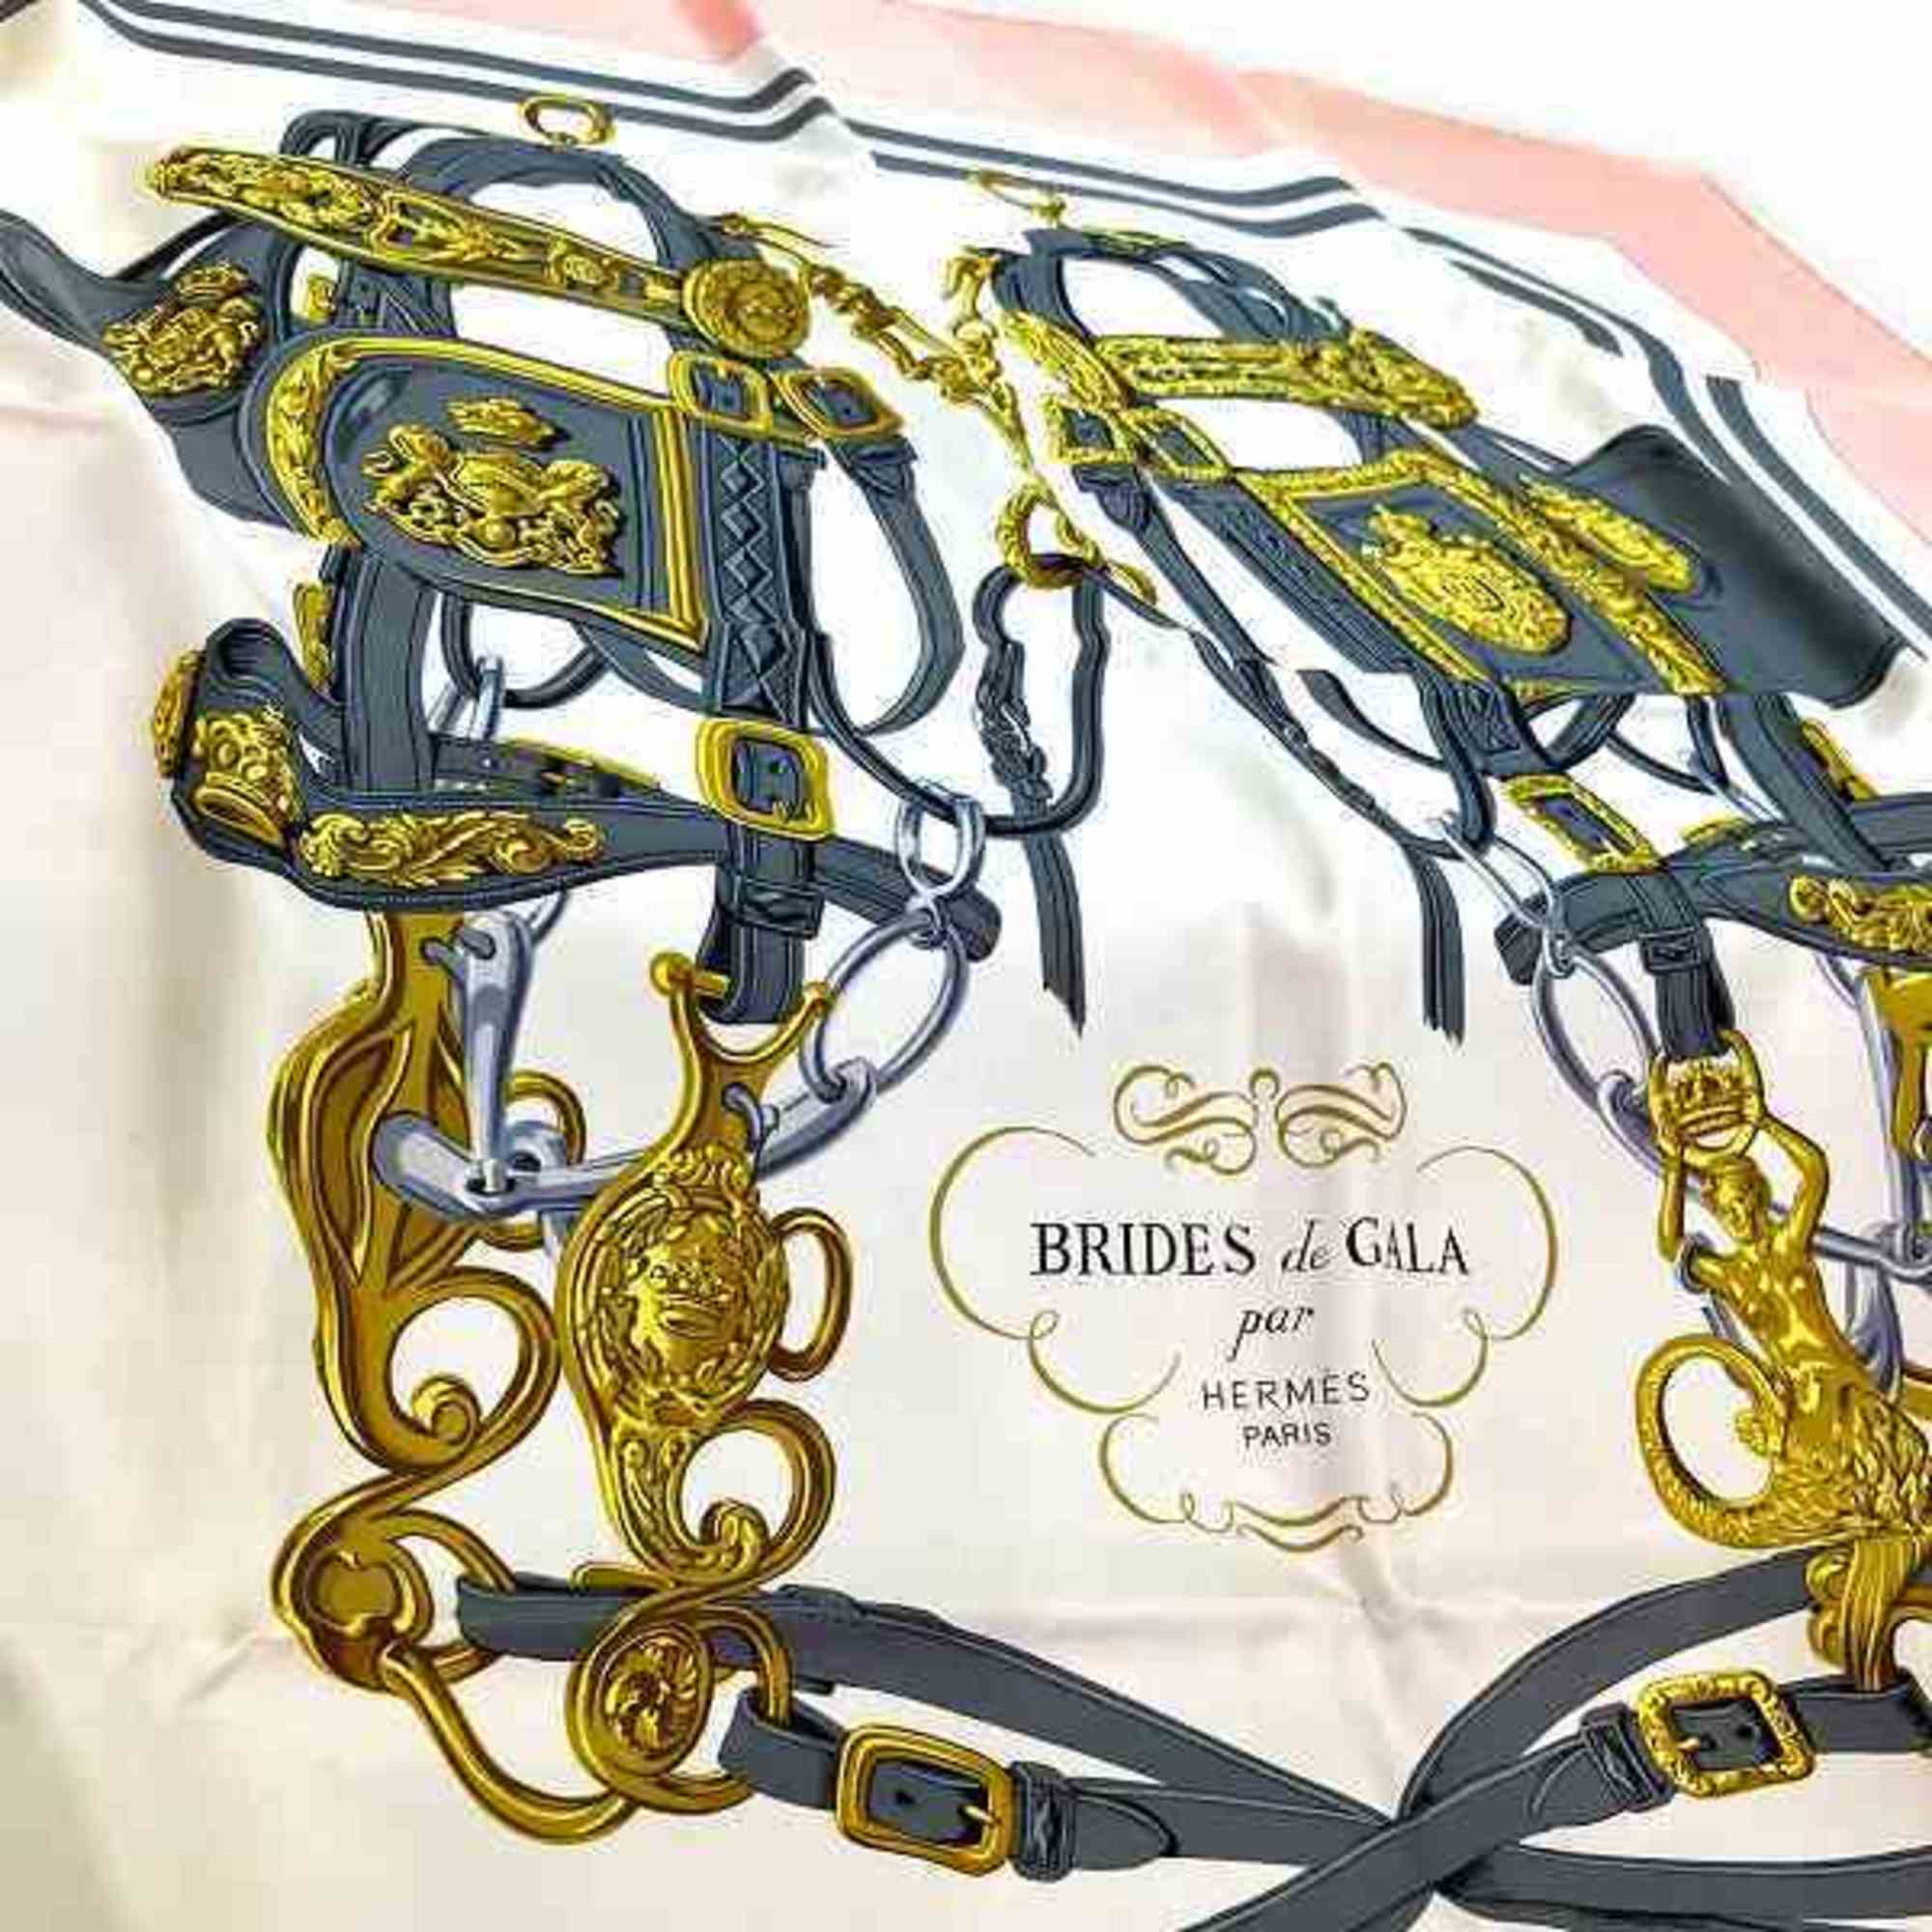 Hermes Carre 90 Ceremony Bridle Brand Accessories Muffler/Scarf Women's